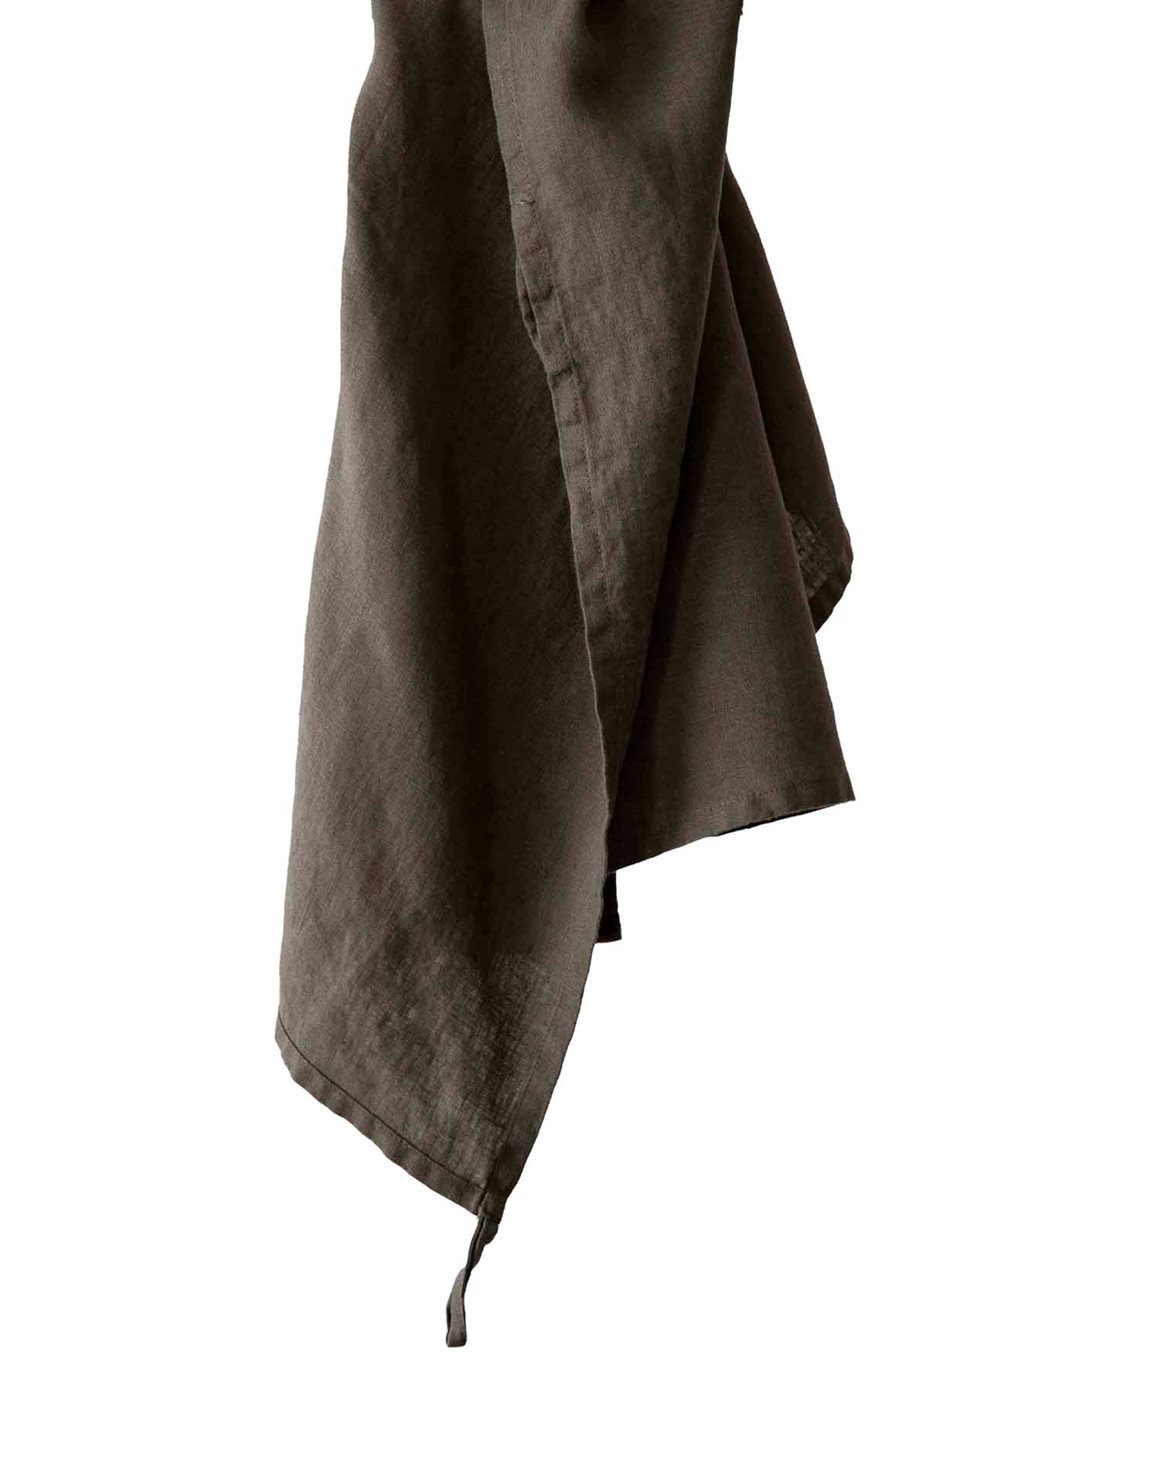 Taupe Linen Kitchen Towel